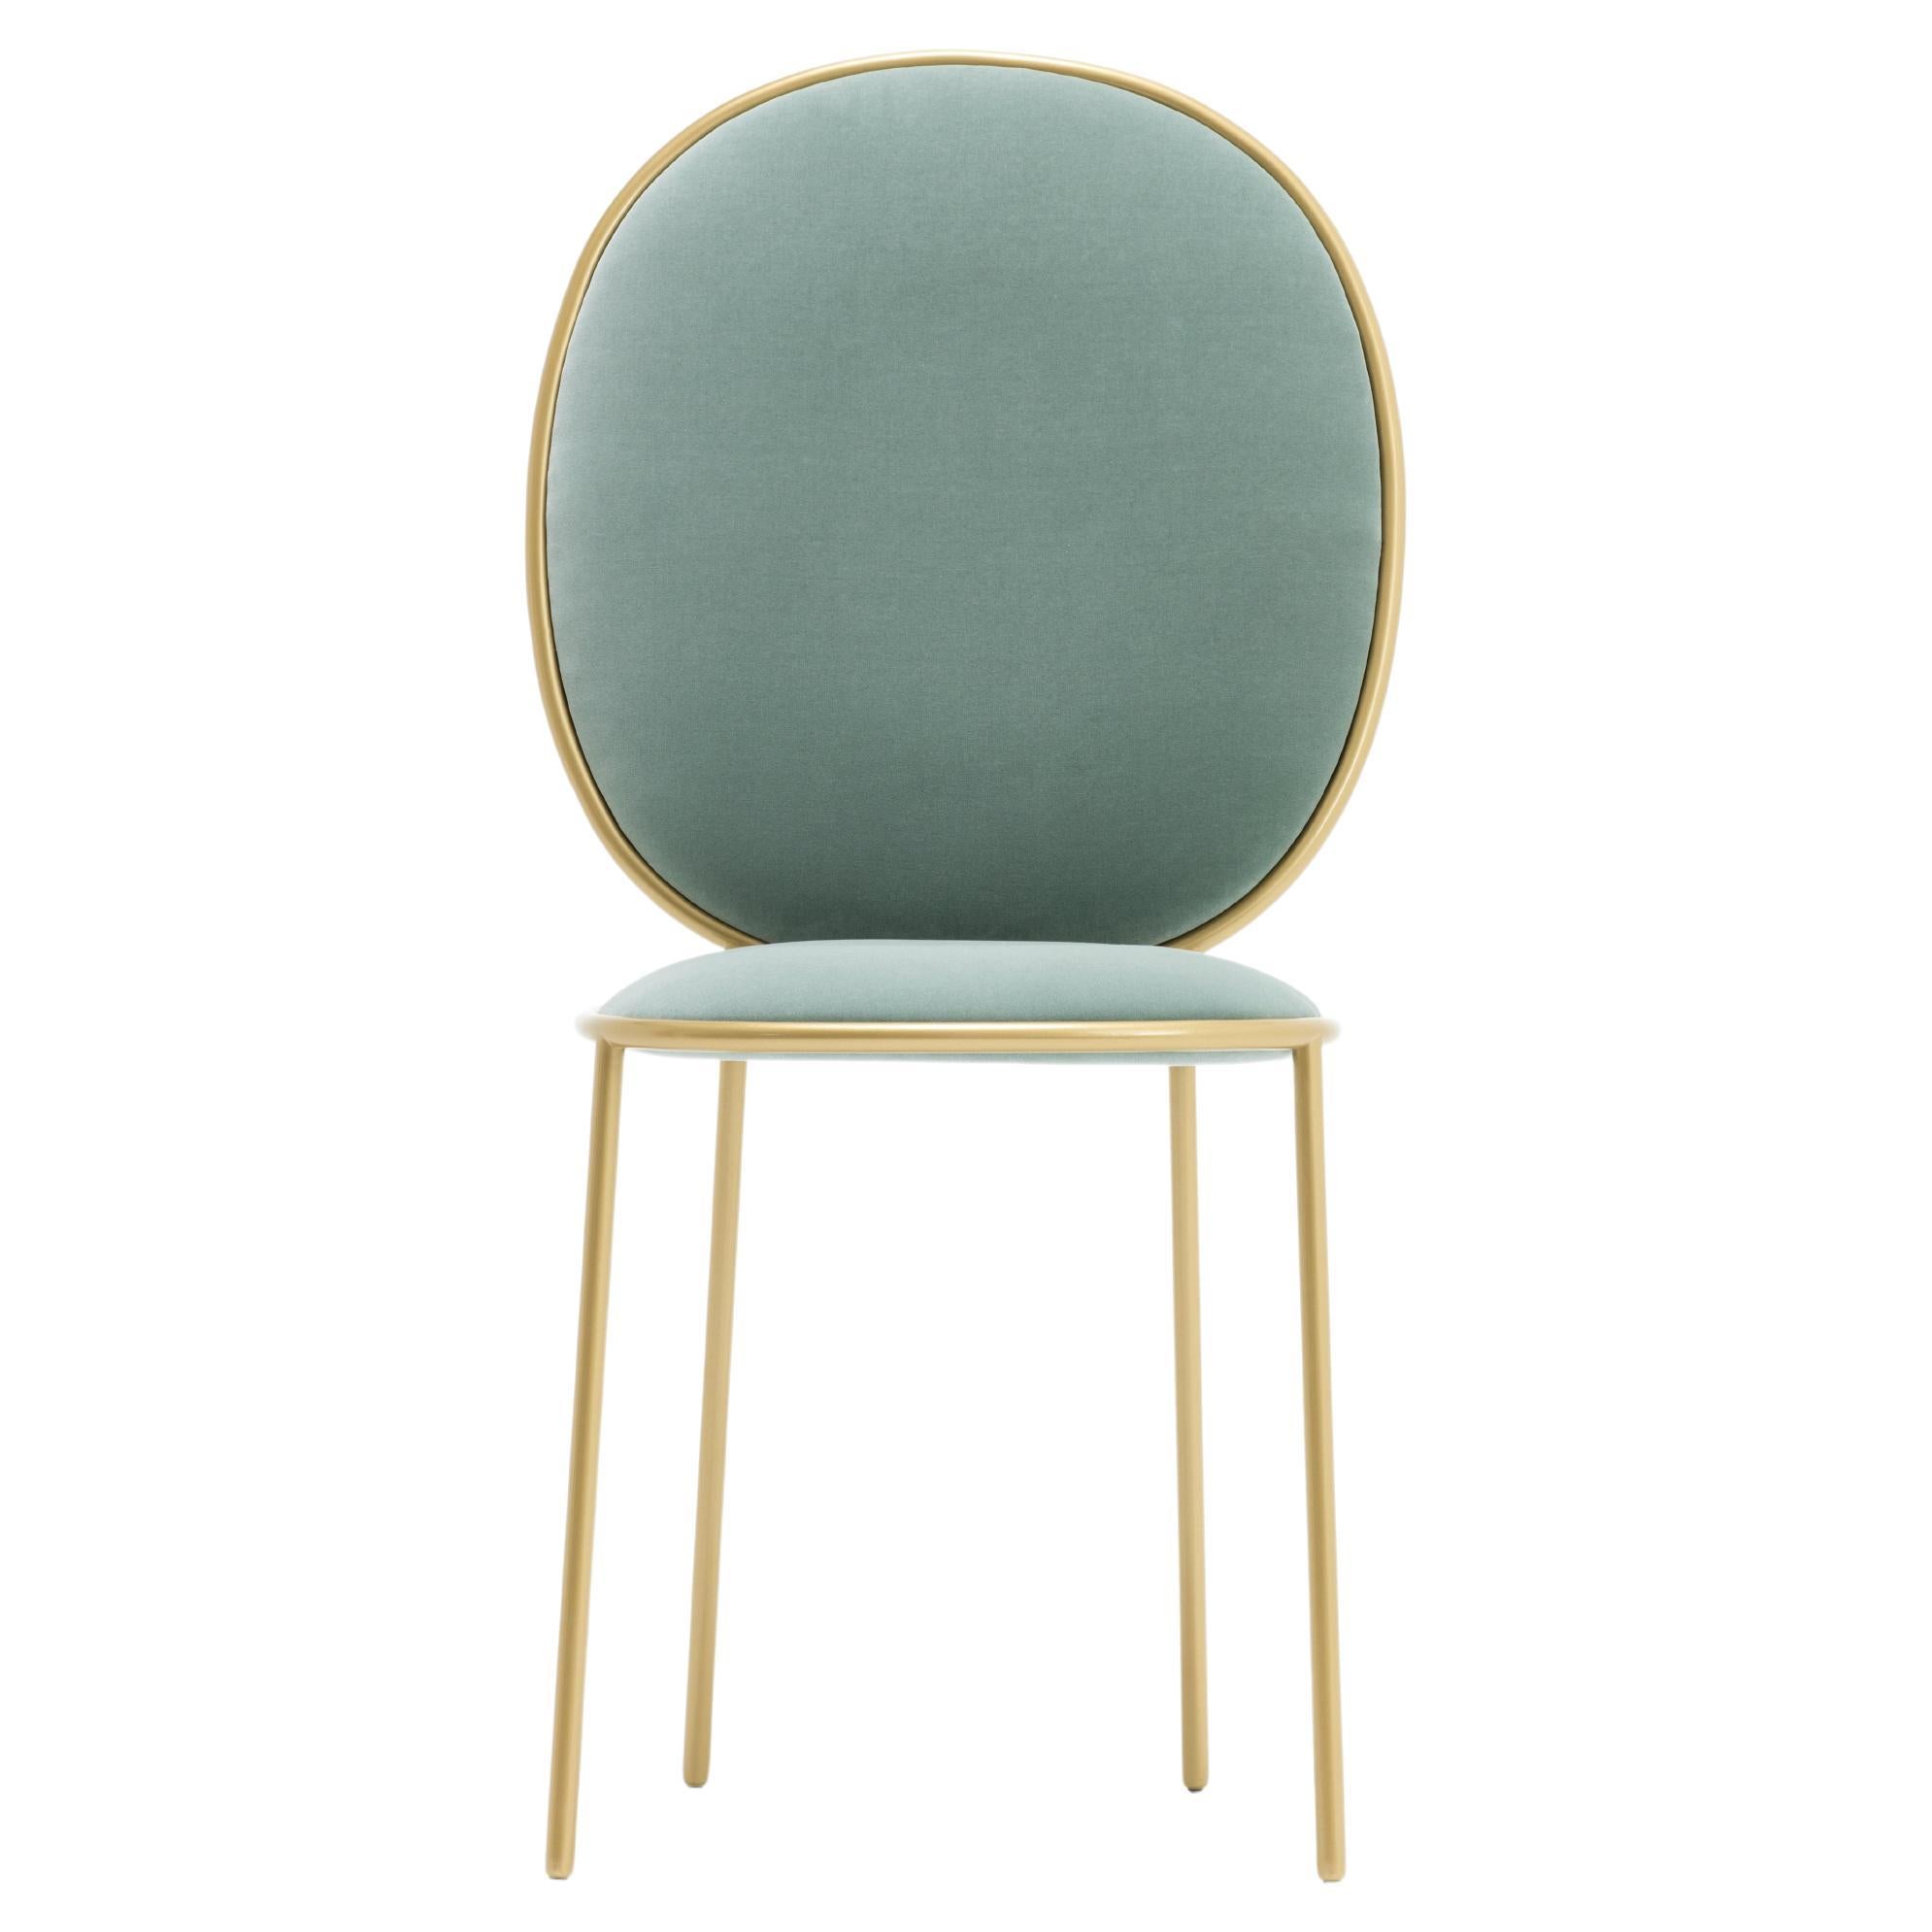 Contemporary Green Velvet Upholstered Dining Chair, Stay by Nika Zupanc For Sale